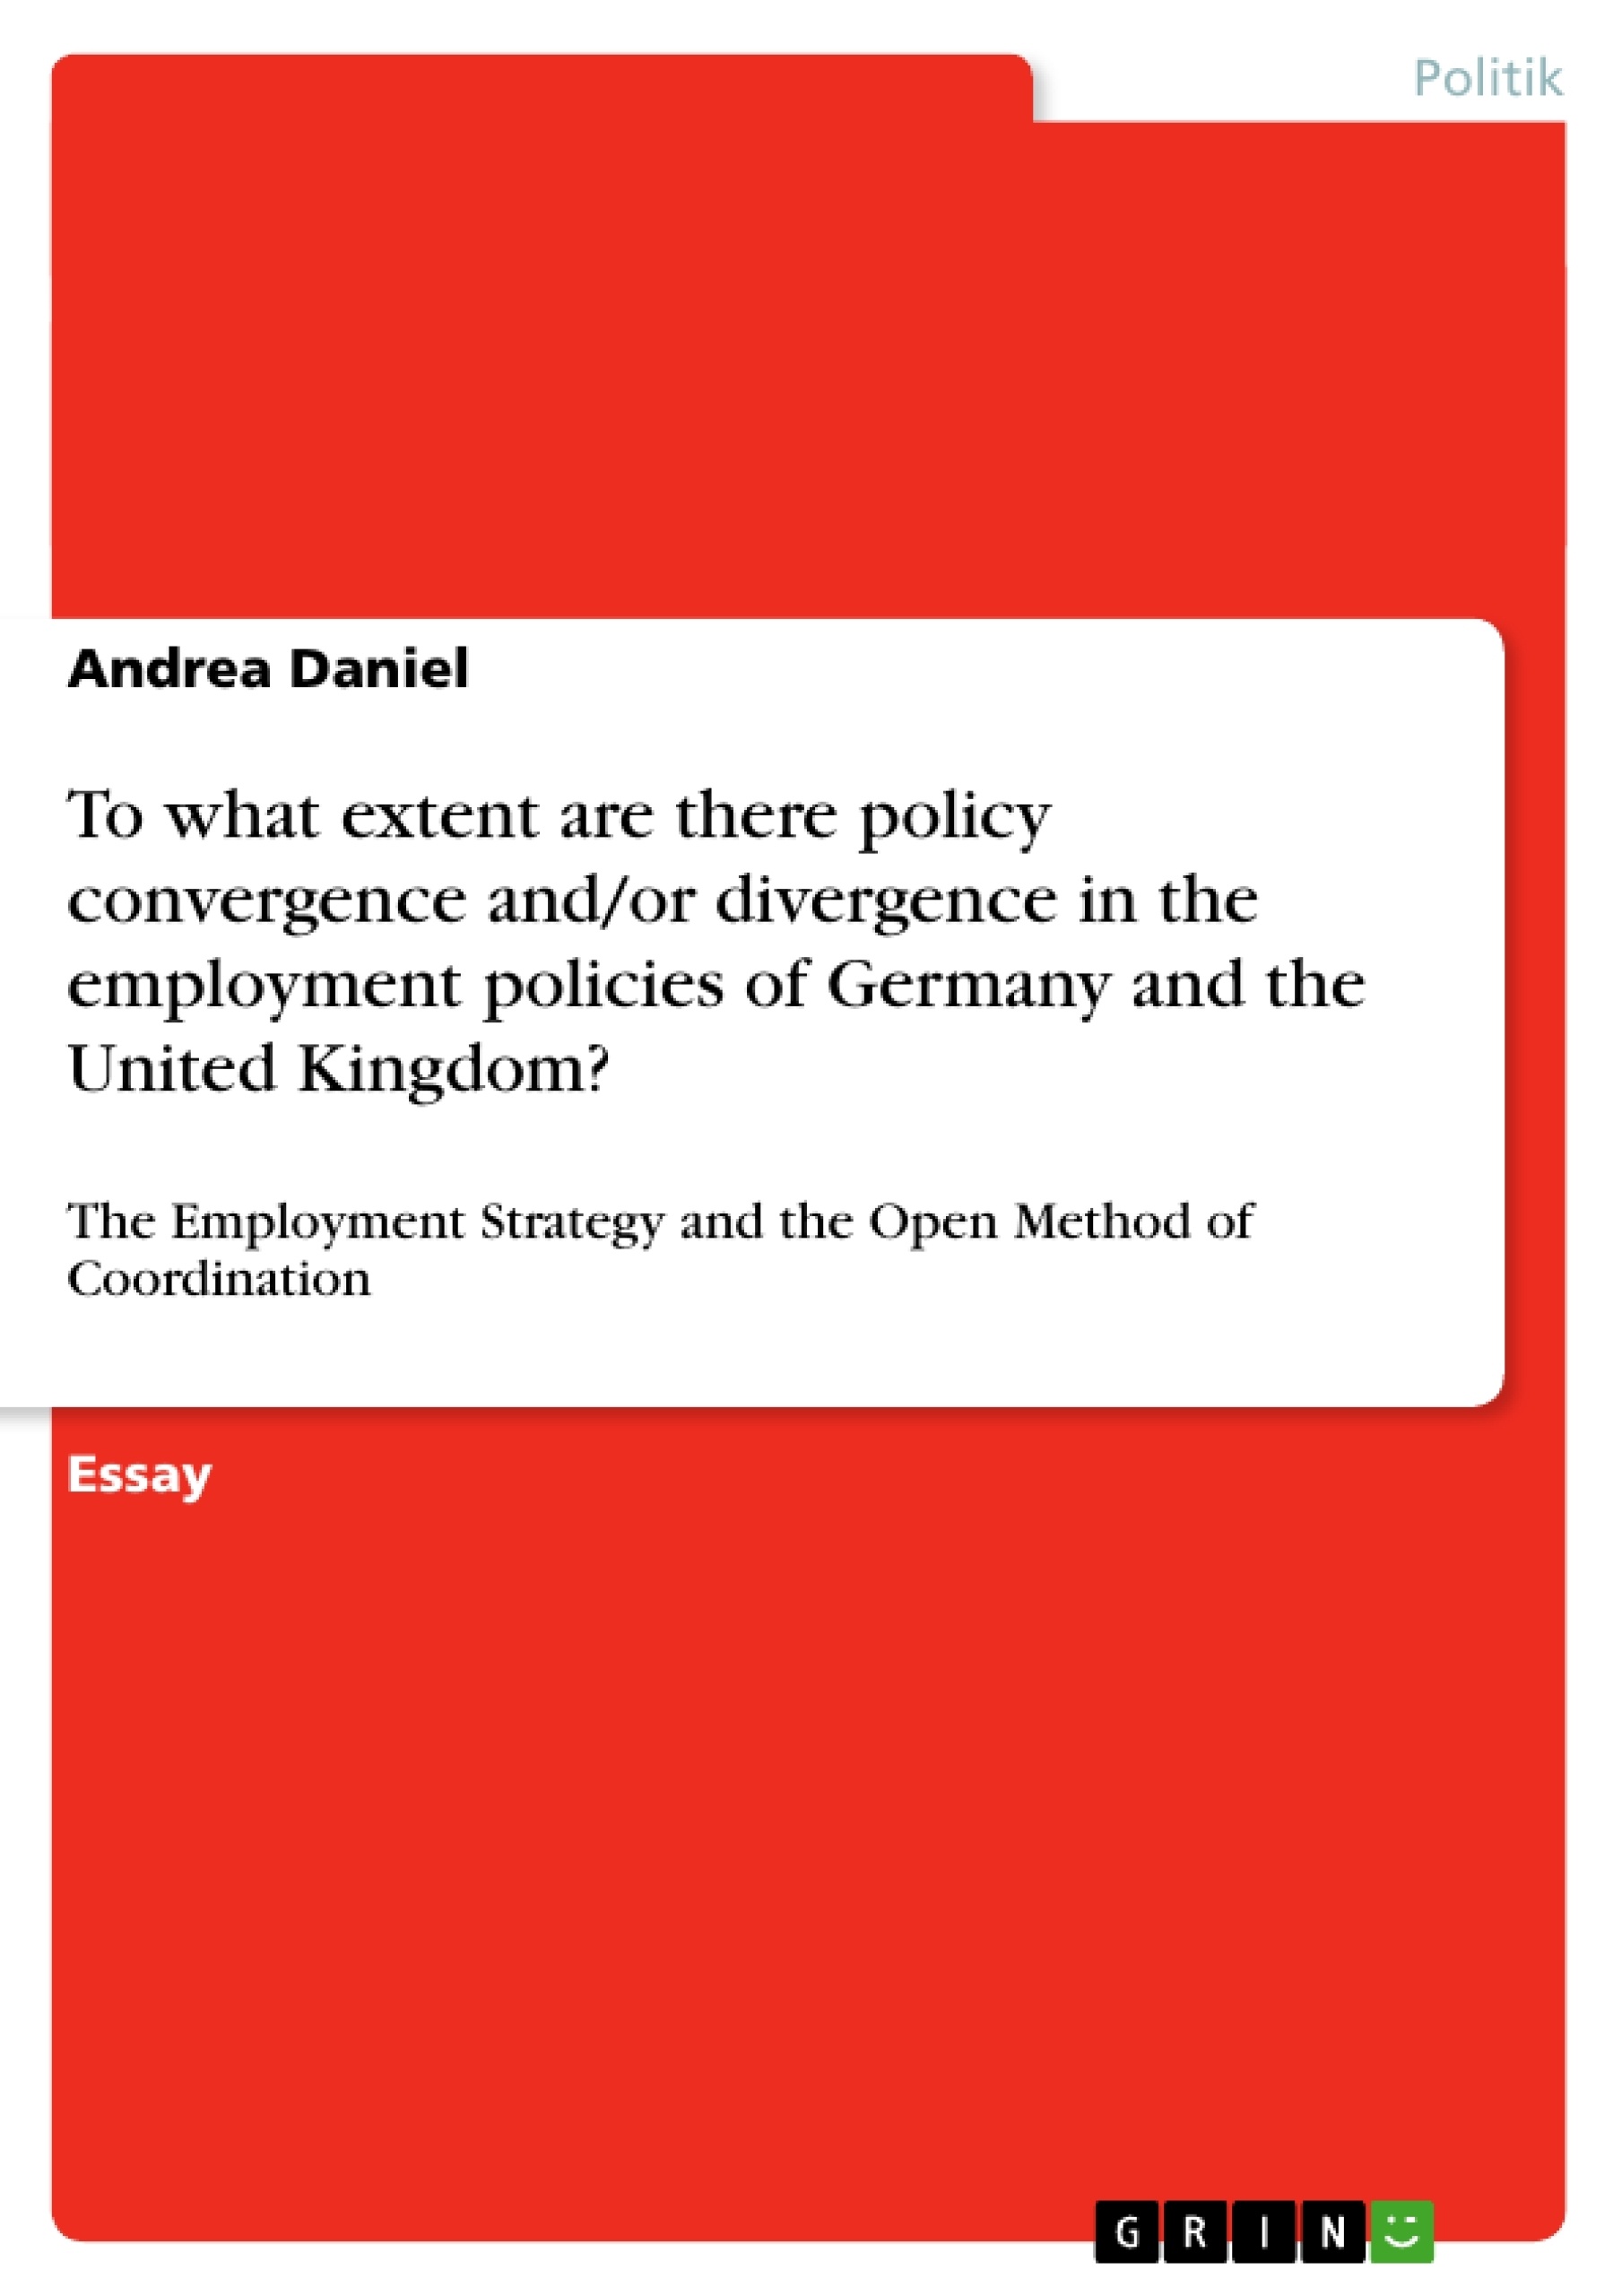 Titel: To what extent are there policy convergence and/or divergence in the employment policies of Germany and the United Kingdom?